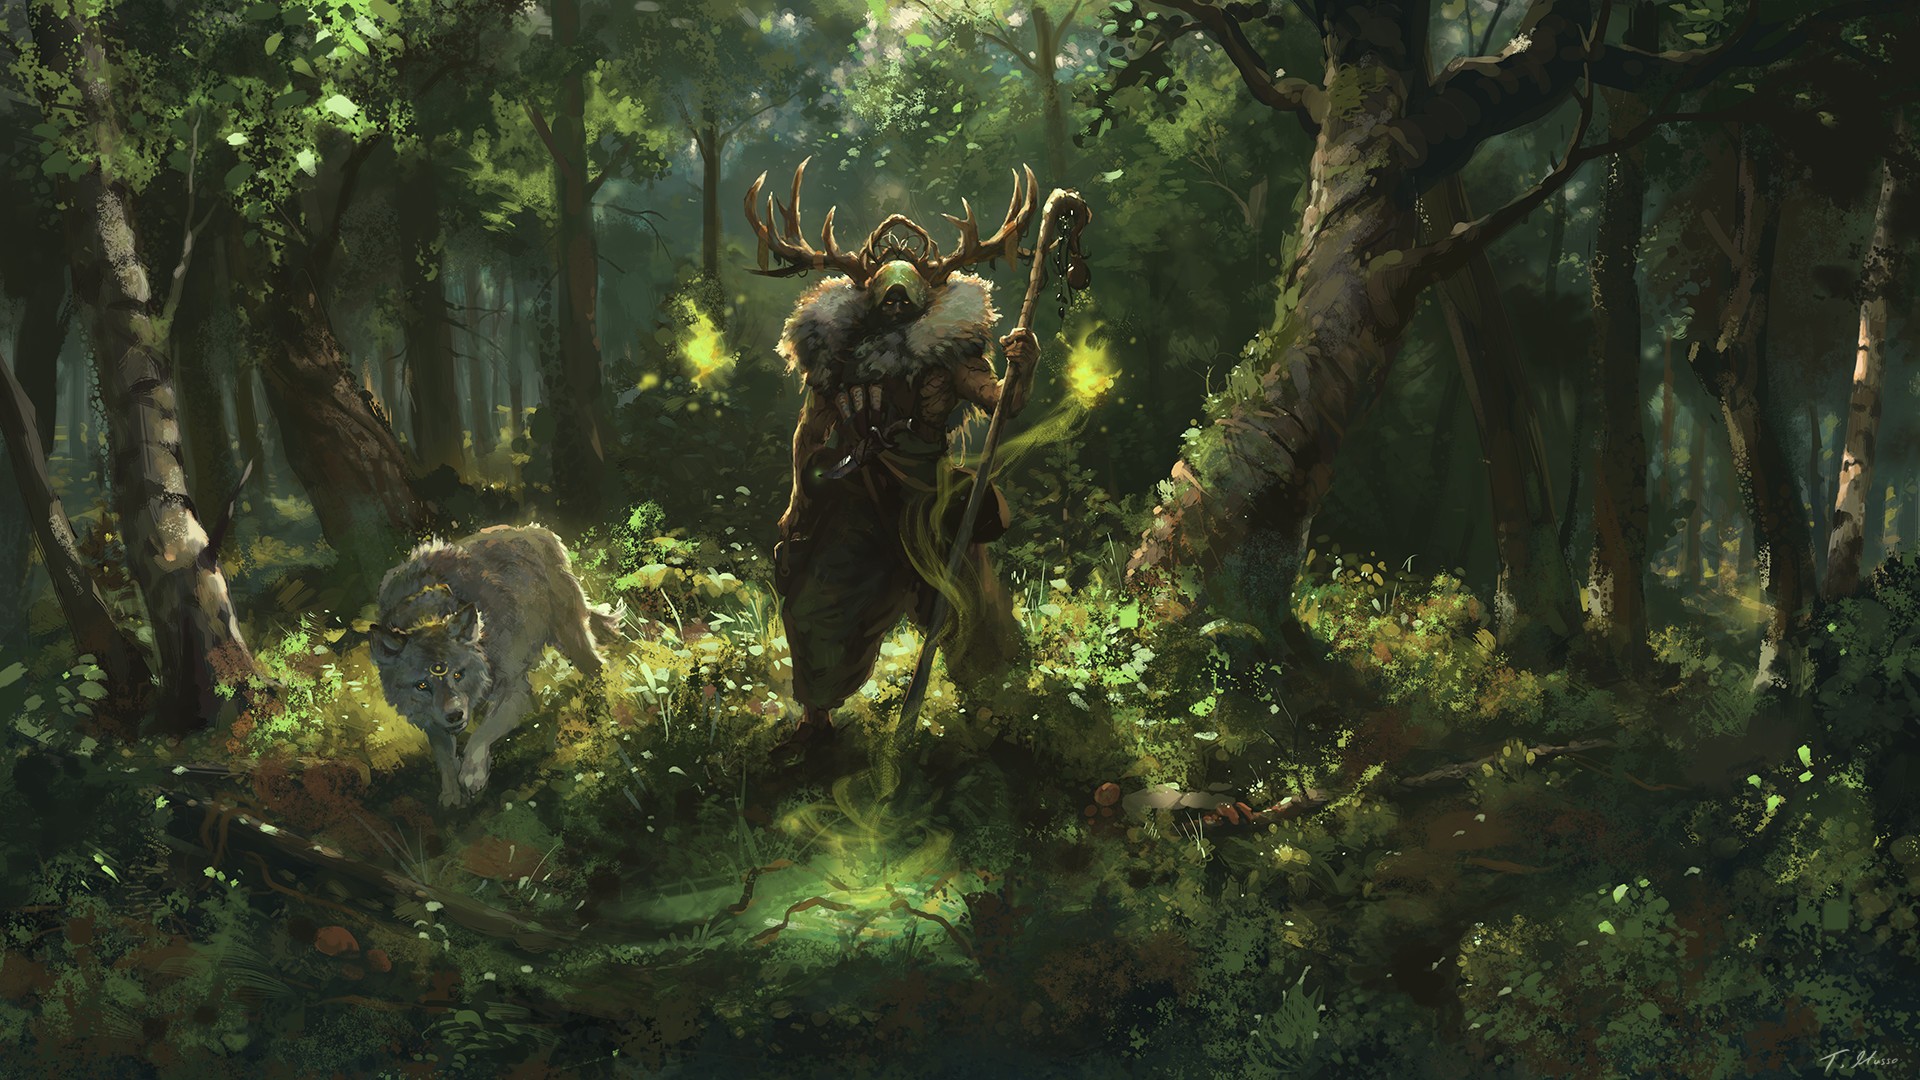 General 1920x1080 forest wolf sorcerer antlers green grass deep forest plants anime